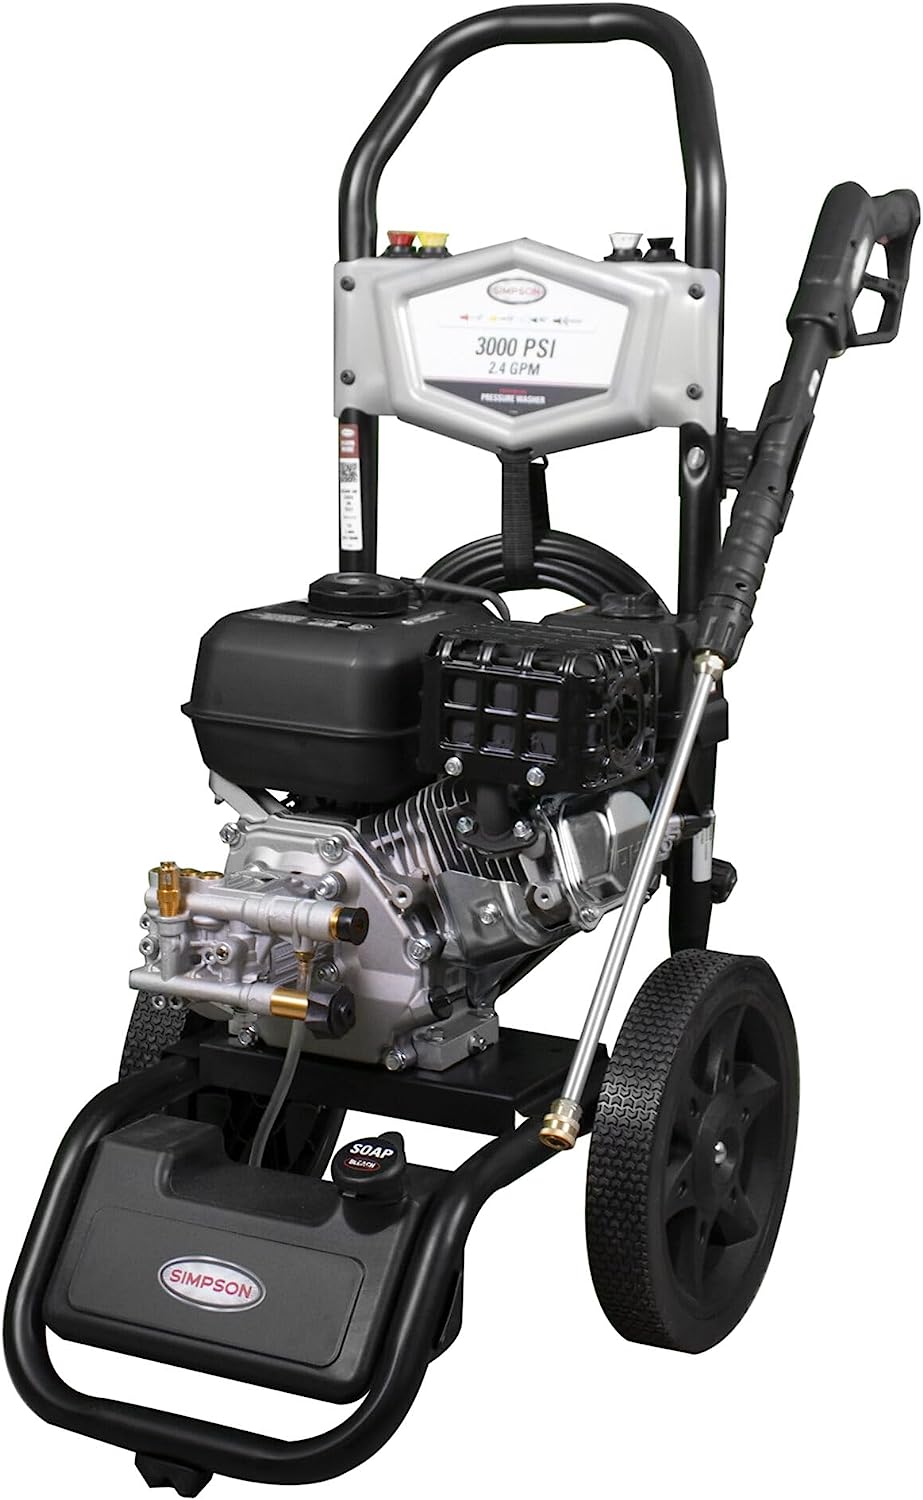 Simpson Megashot MS61221 3000-PSI Gas Pressure Washer with CRX210 OHV Engine